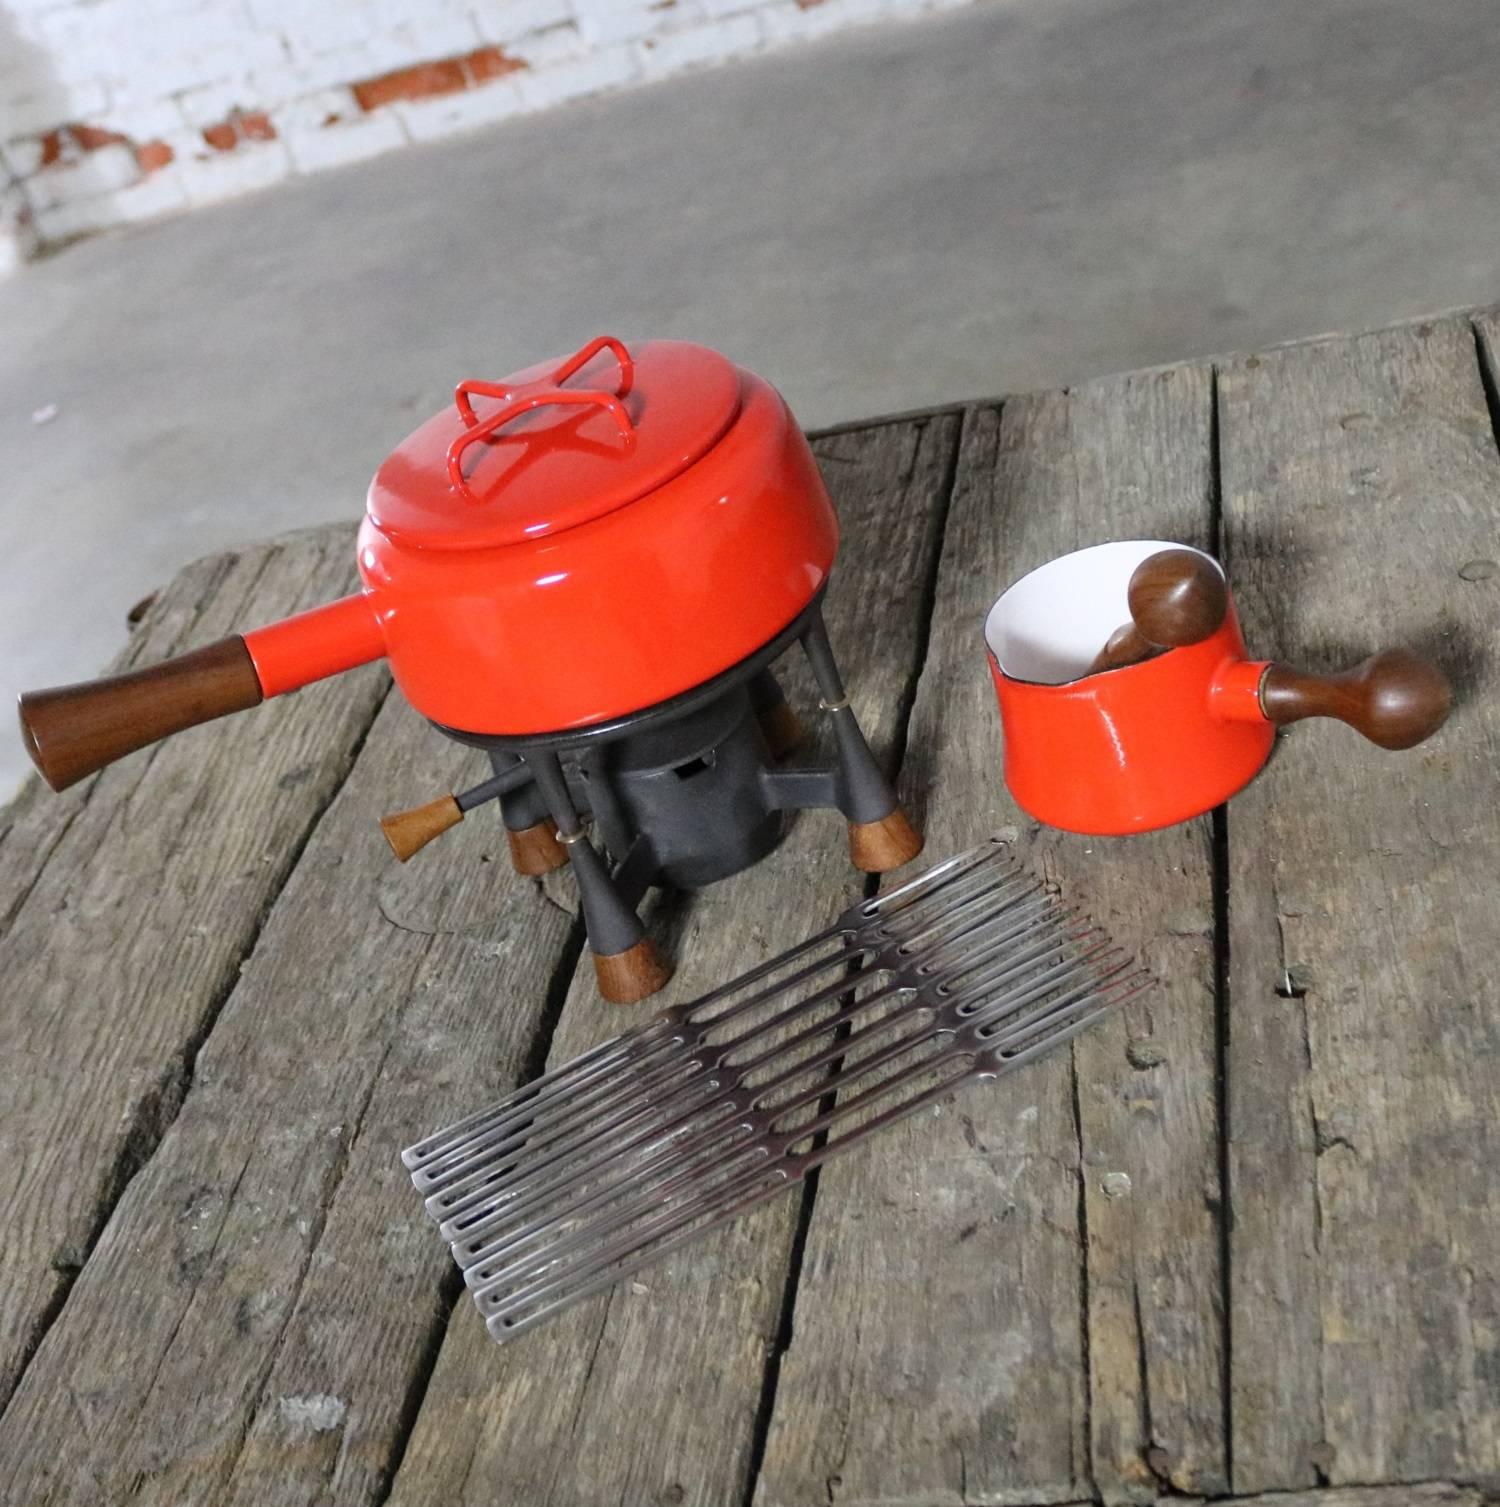 Presenting a set consisting of the Dansk Kobenstyle fondue pot with lid, stand and warmer; along with a Dansk Kobenstyle butter warmer/sauce pan with basting brush; plus, a set of eight Dansk France IHG stainless-steel fondue forks. All are in